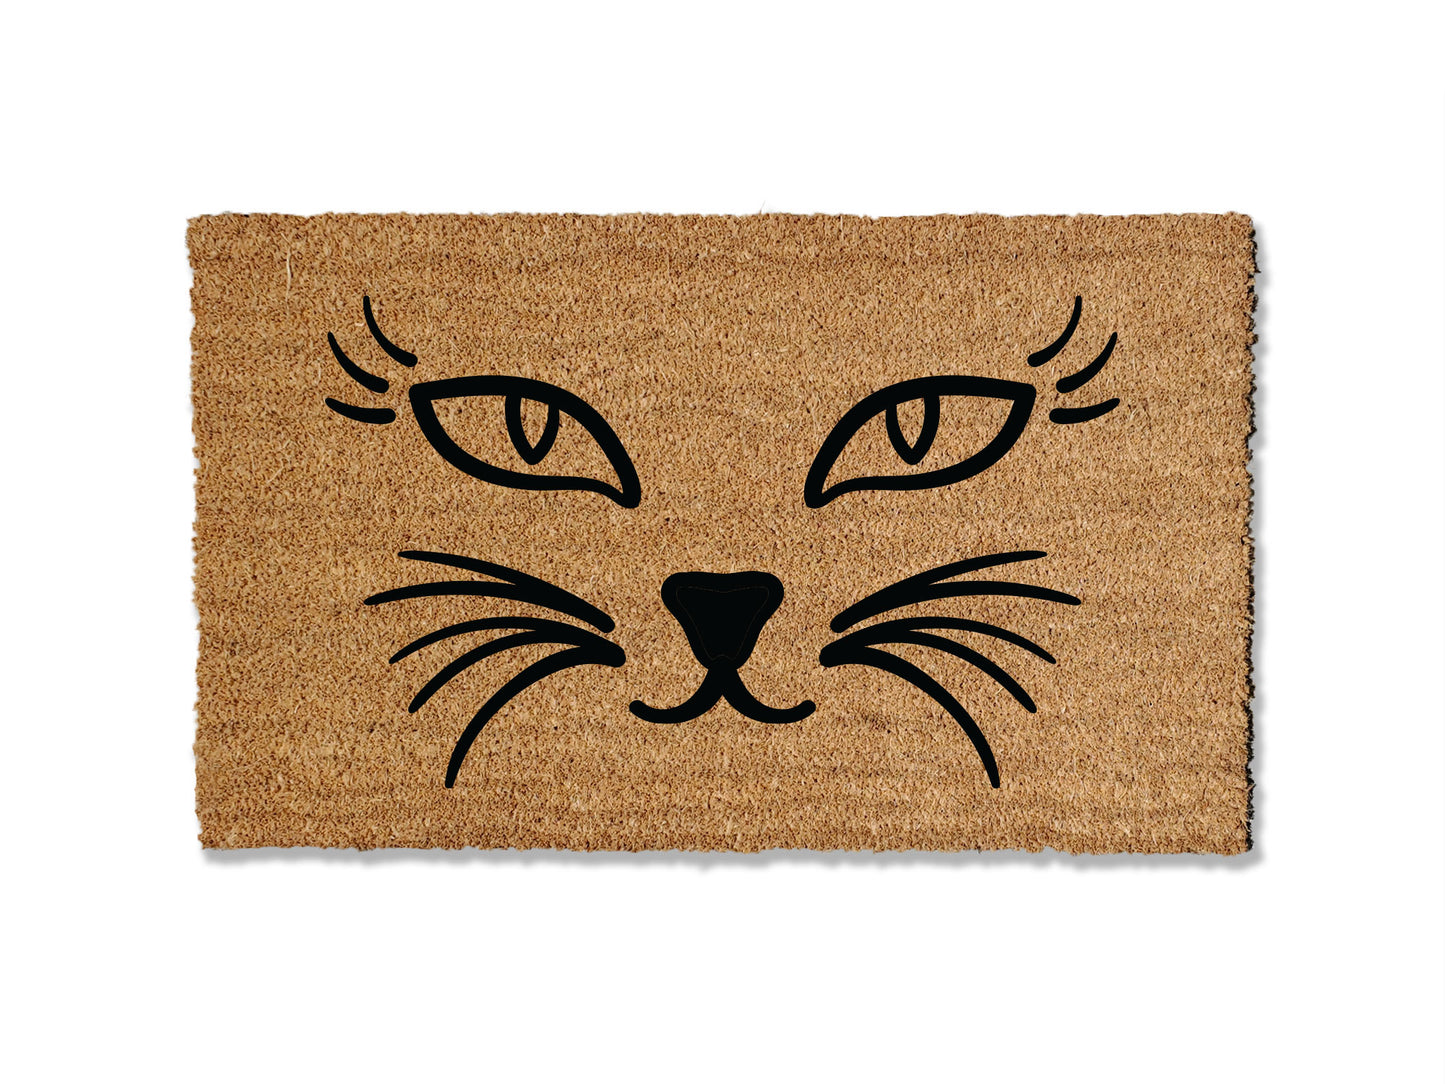 Custom 1/2 inch thick coir doormat featuring a charming cat face design. Personalize your entryway with this delightful mat, which not only adds a touch of canine charm but is also highly effective at trapping dirt, ensuring a clean and inviting home.